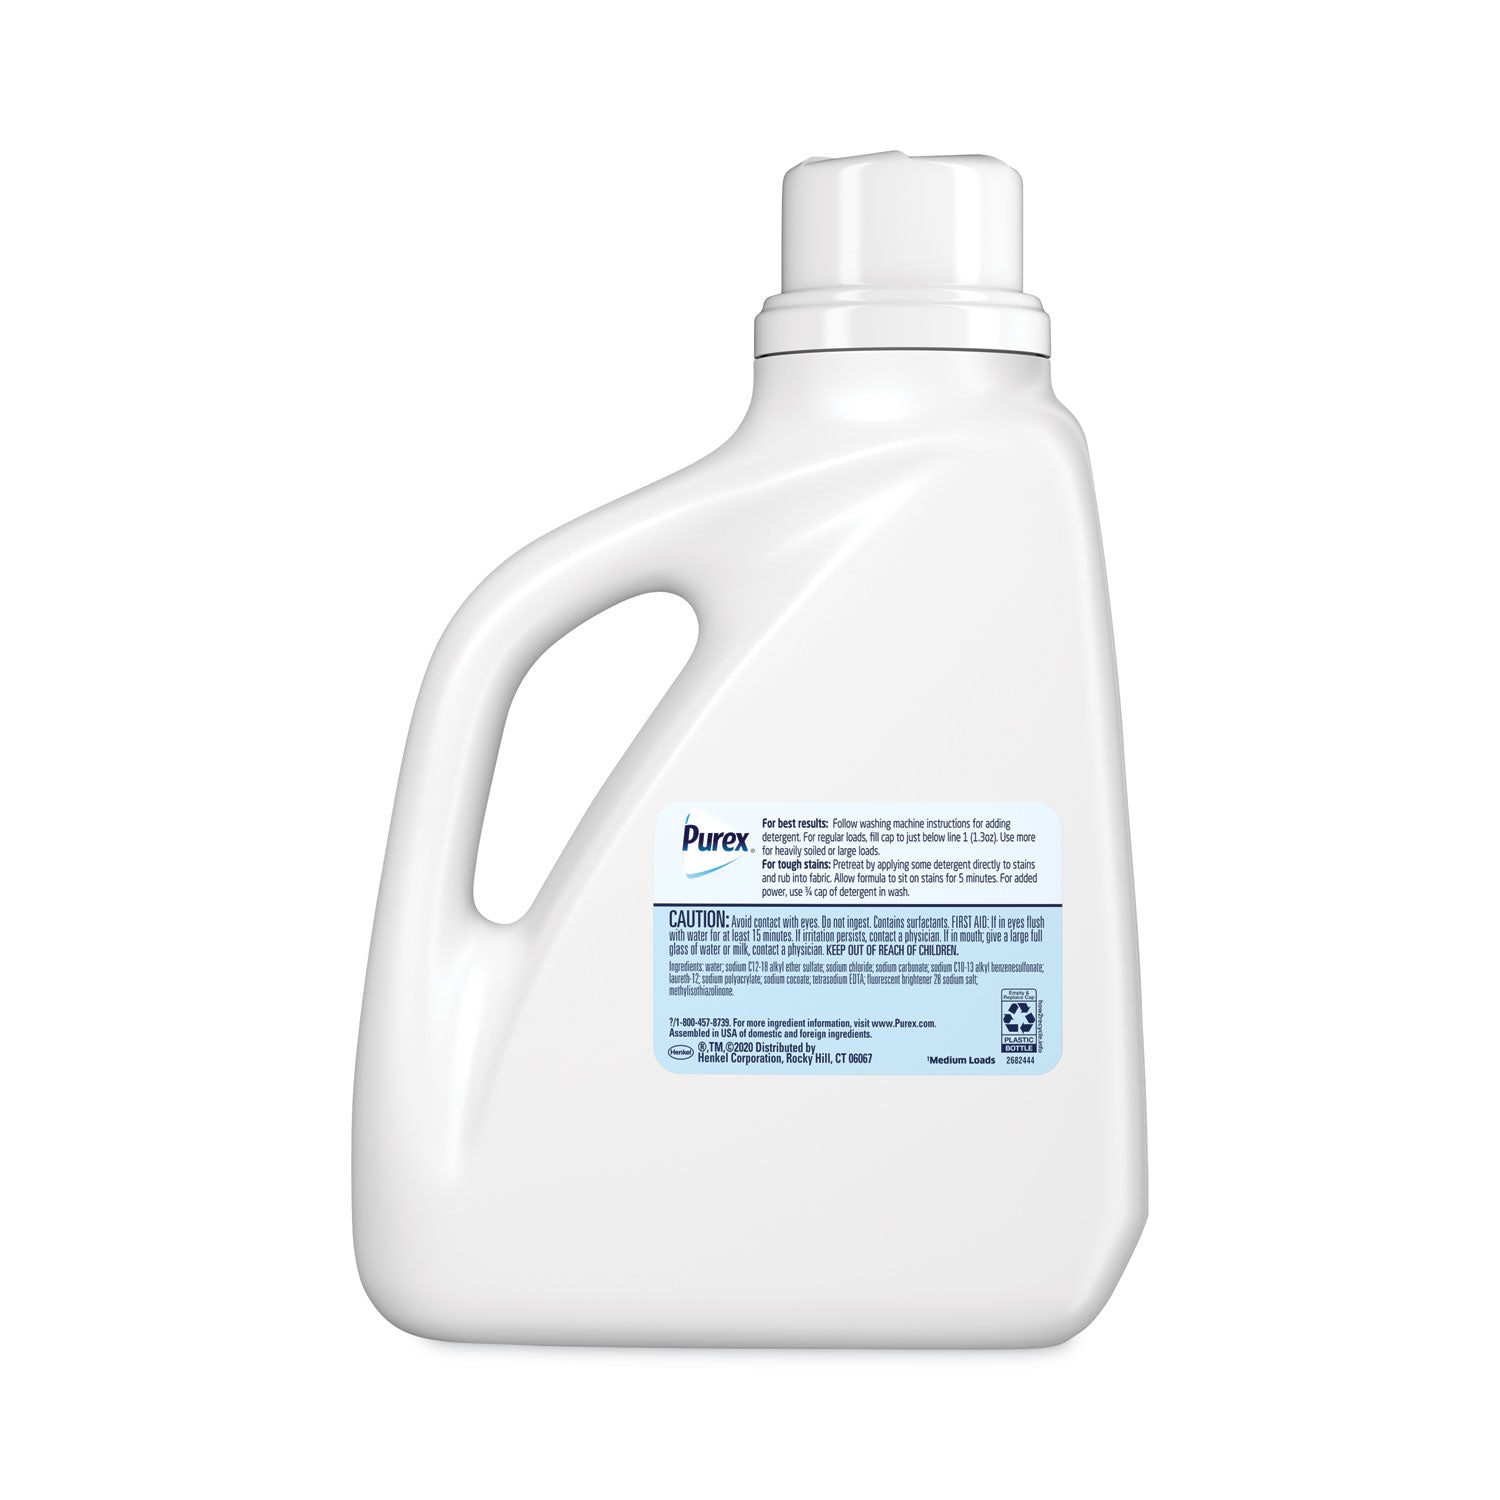 free-and-clear-liquid-laundry-detergent-unscented-75-oz-bottle-6-carton_dia2420006040ct - 2